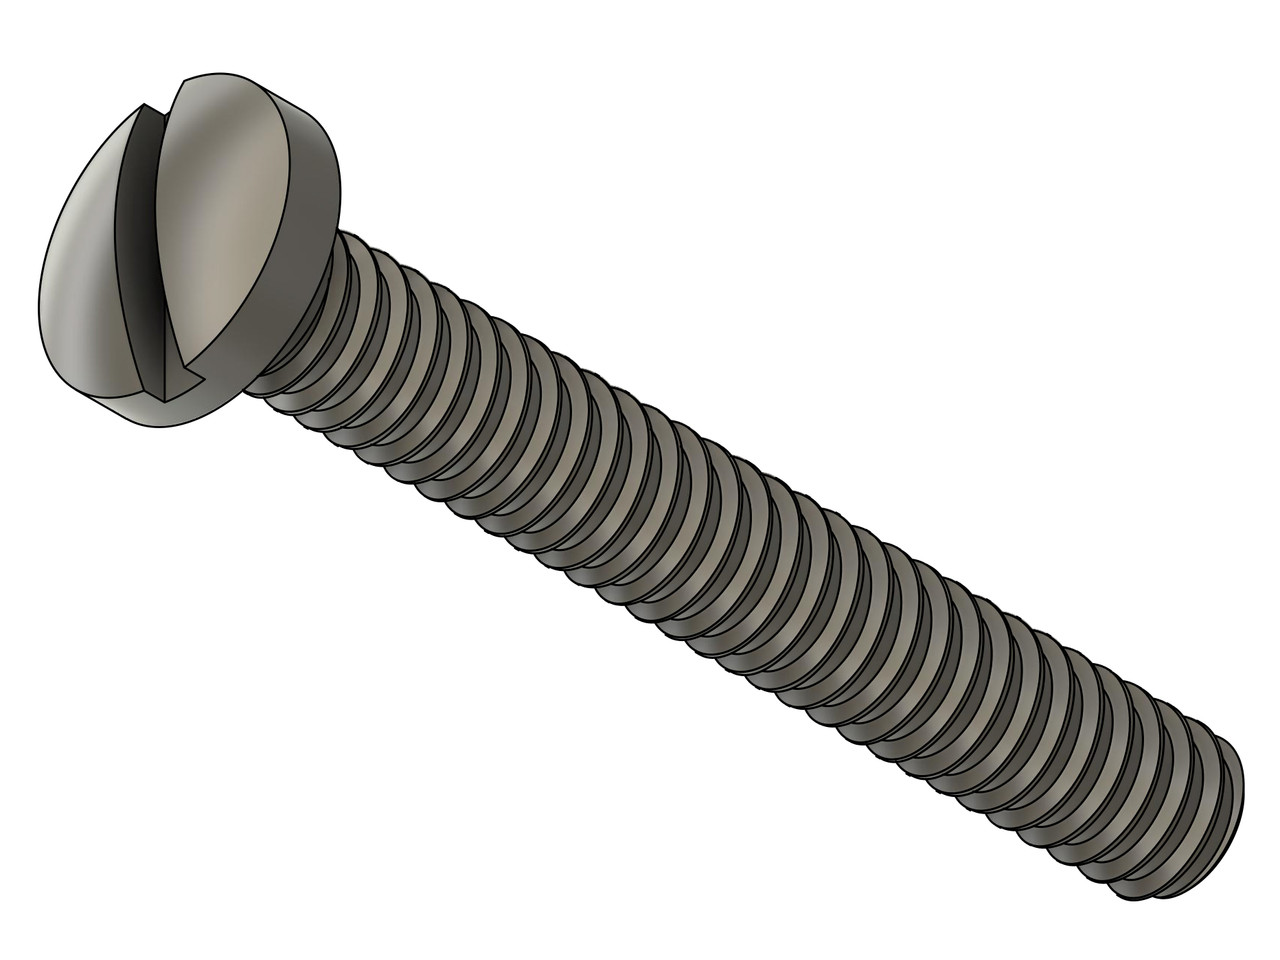 Machine Screw Special  Thread M1.4, Pitch .30mm, Head Diameter 2.5mm, Threaded Length 9.7mm (3/8"), Overall Length 10.5mm Material Stainless Steel, Finish Color "Silver" 

Note: Thread is at maximum for M1.4 Thread.  This screw was designed for tight fit like class 3 fit instead of standard class 2.   Price is for 100 count package with bulk pricing available.